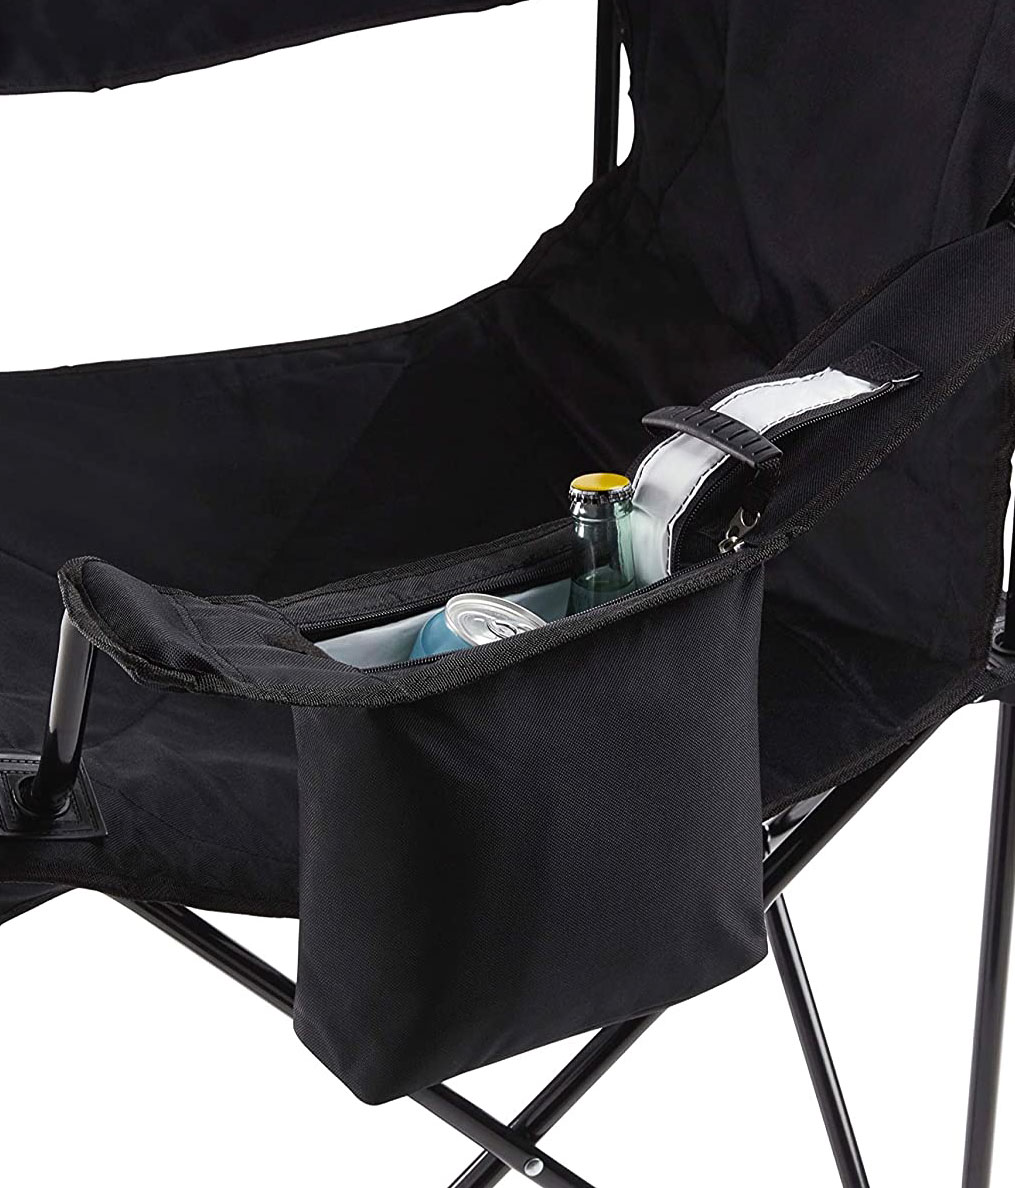 4-can cooler built into folding camping chair - great Father's Day gift!